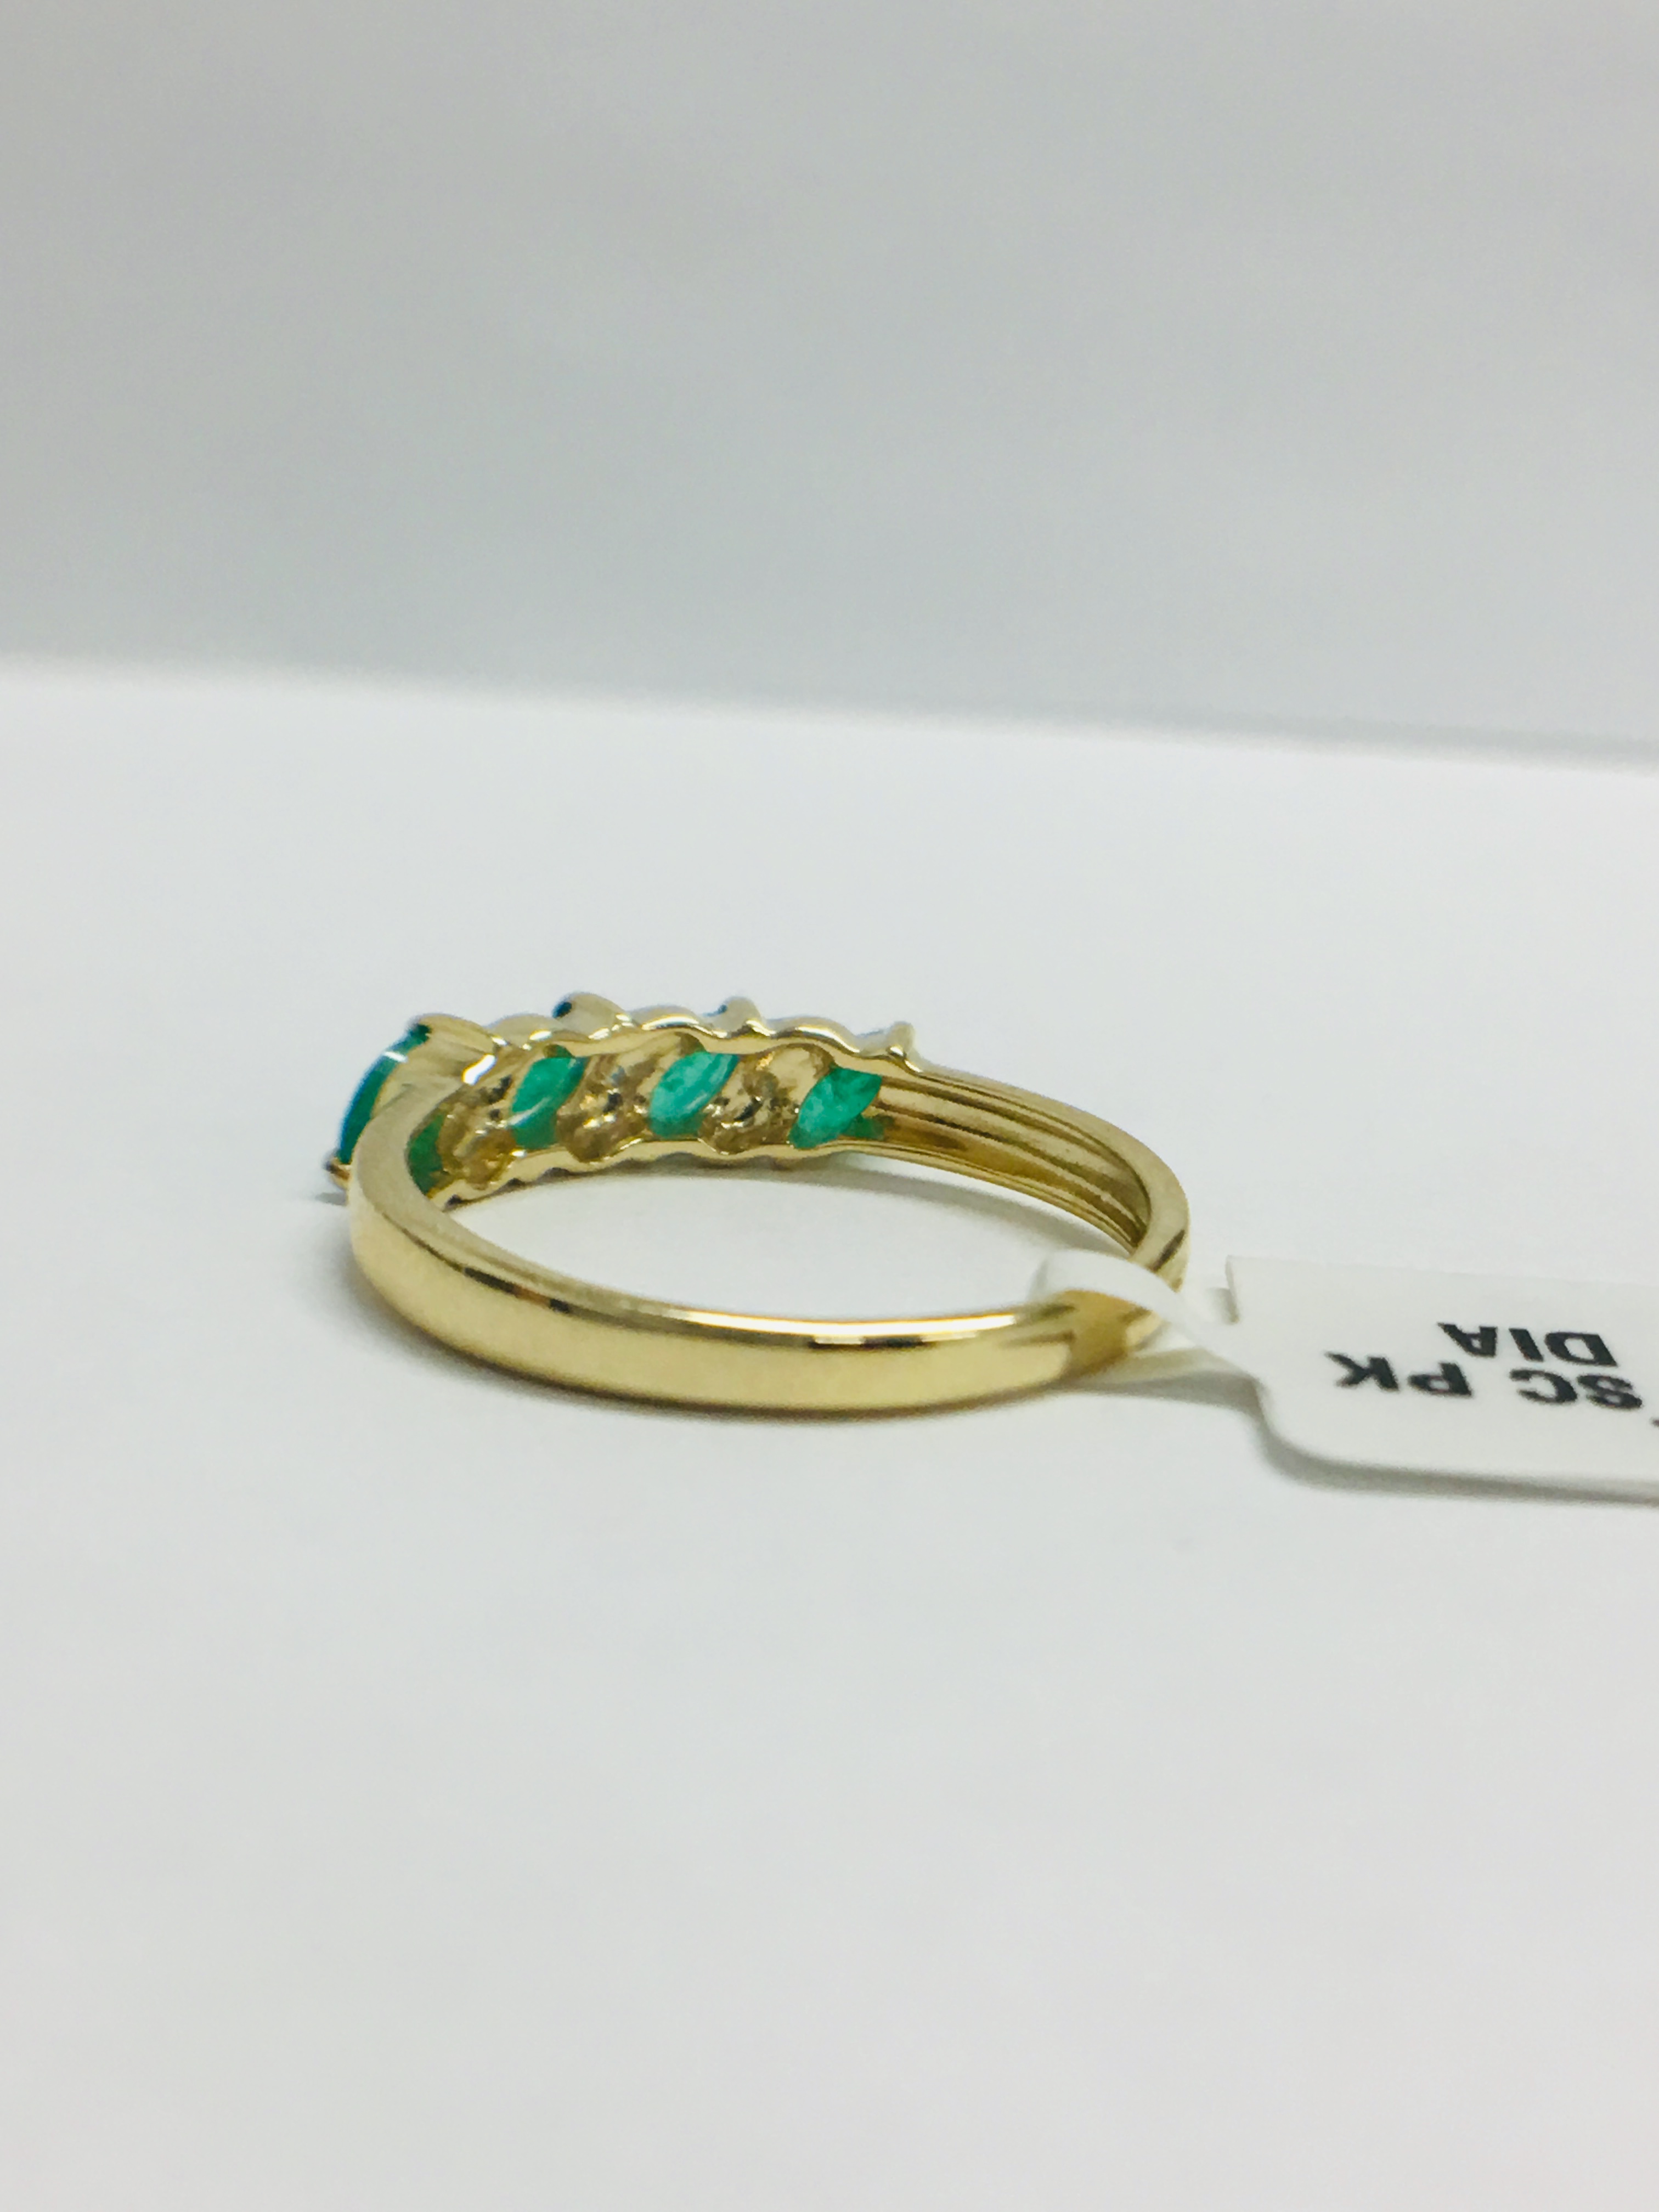 9ct yellow gold emerald and diamond ring - Image 6 of 11